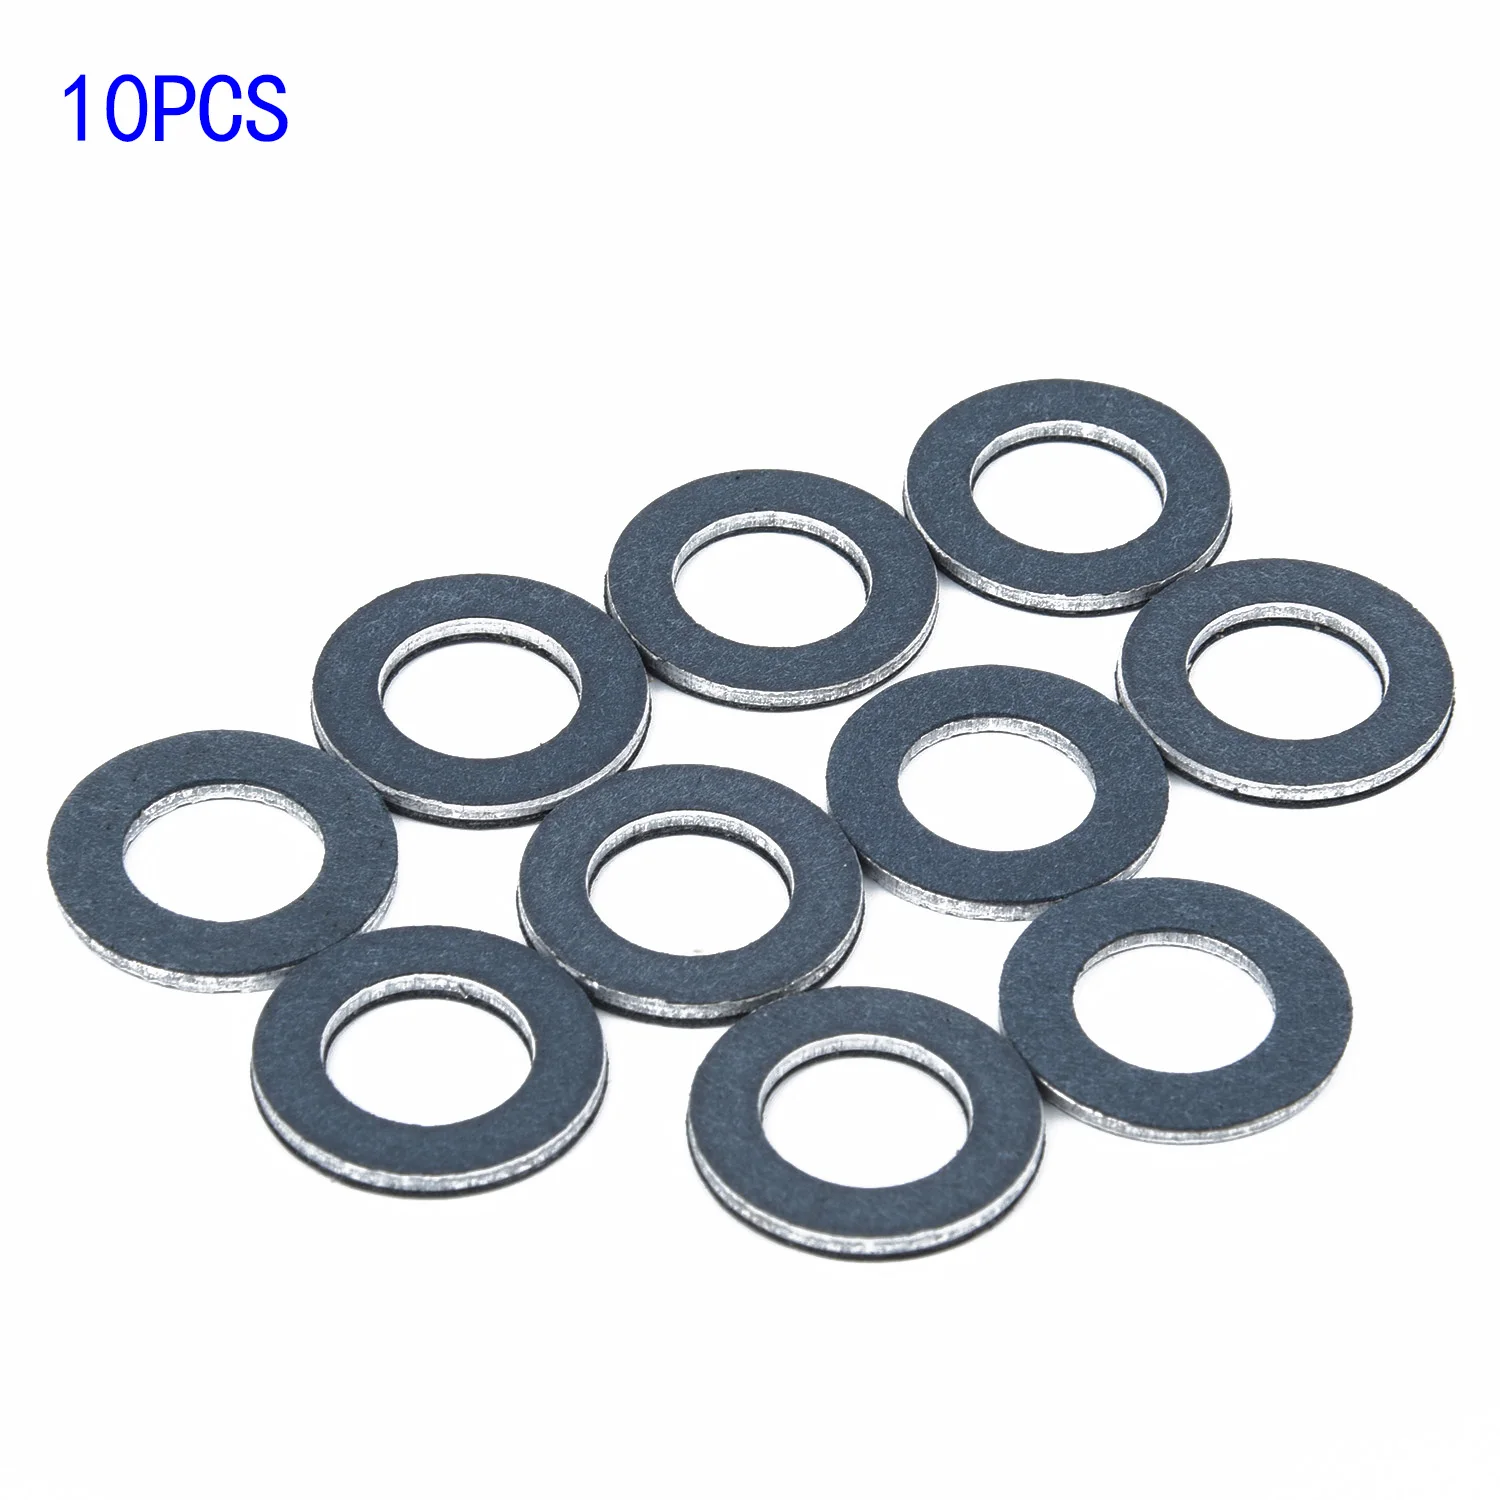 10pcs/Set Car Trucks Washers For TOYOTA Drain Plug Seal Engine Replacement Parts